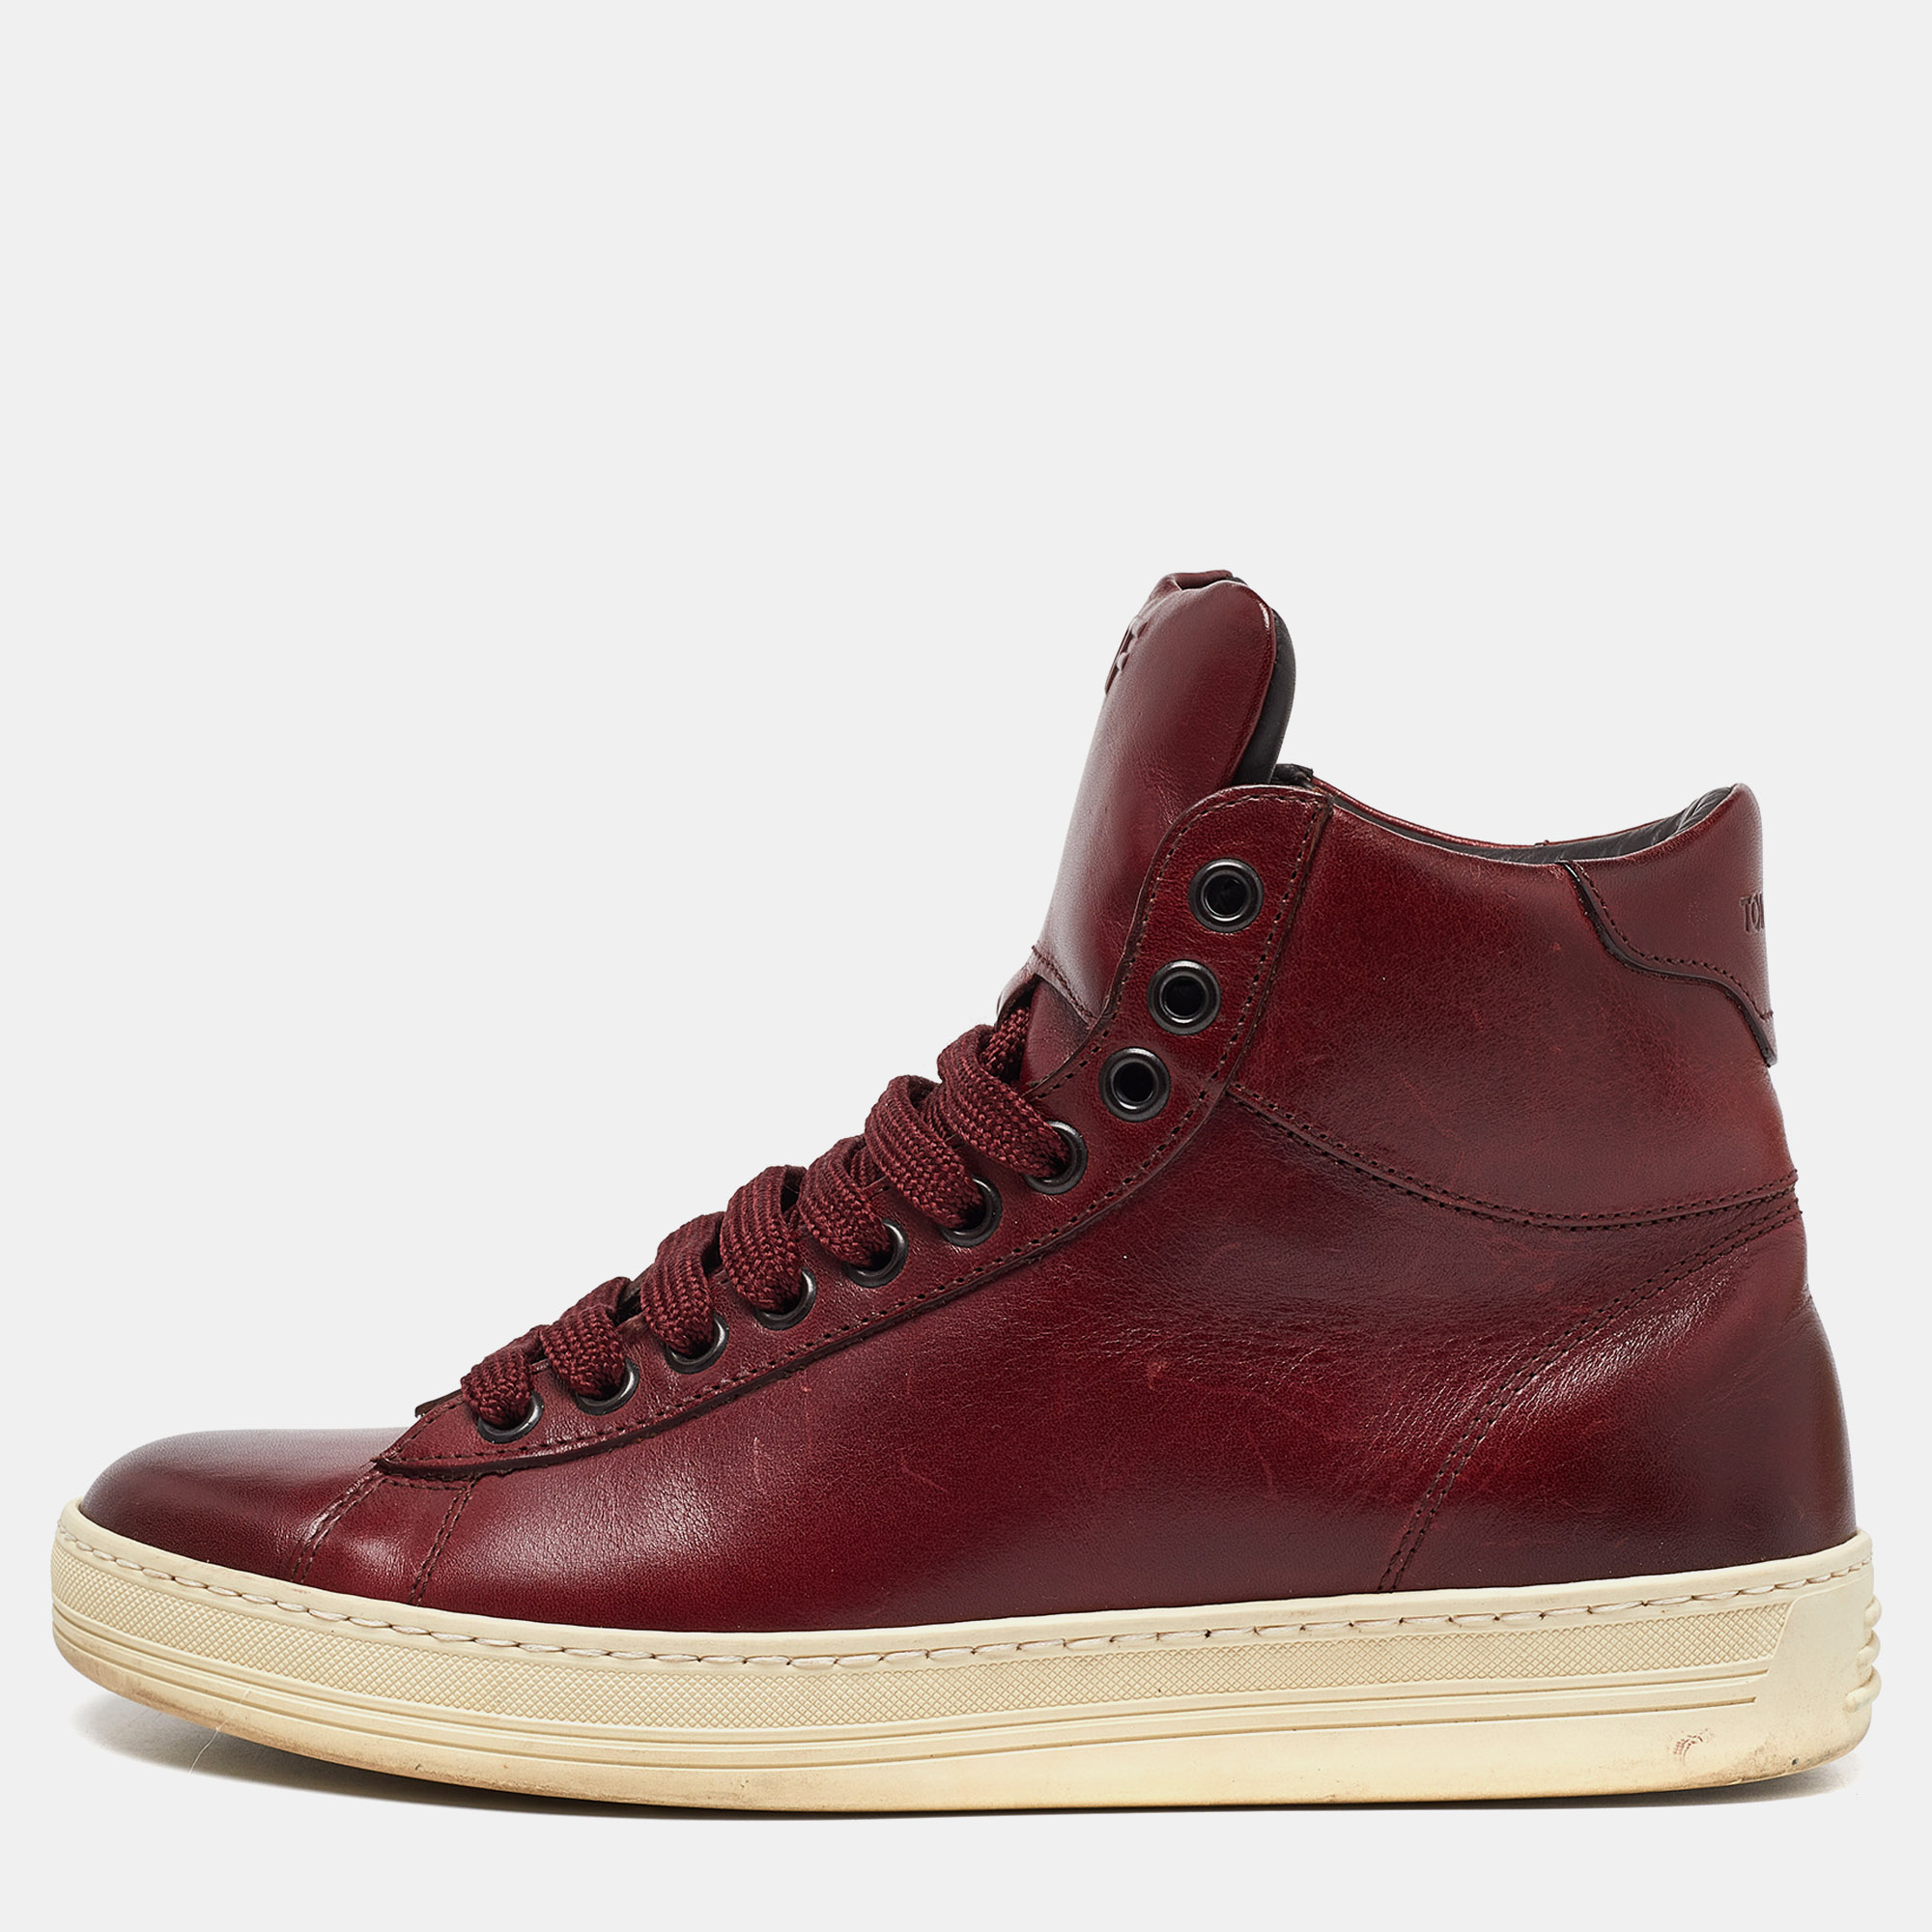 Tom ford burgundy leather high top sneakers size 36.5